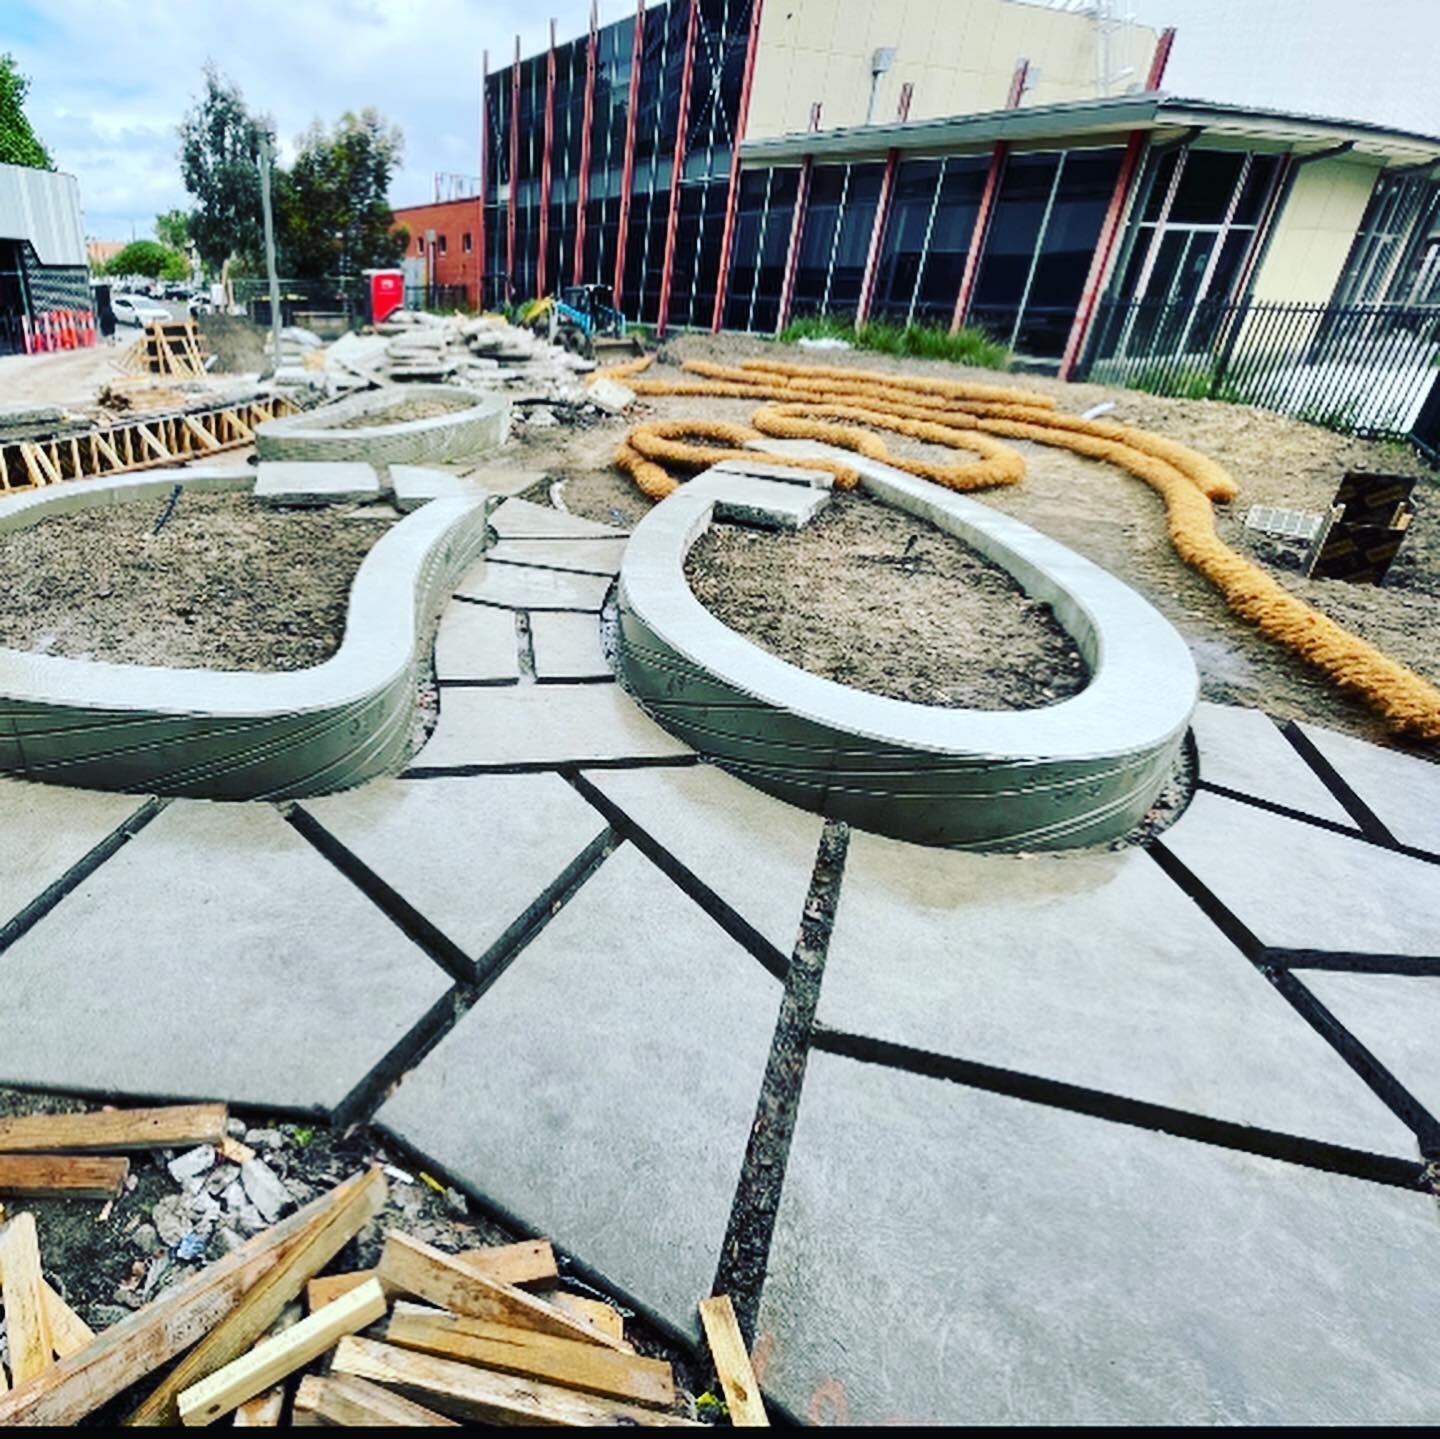 More work in progress shots at Richmond High School. Kate has been out on site chatting with @hallmarklandscapes around texturing and interfaces between recycled from site saw cut paving, recycled from site concrete retaining walls, new concrete reta